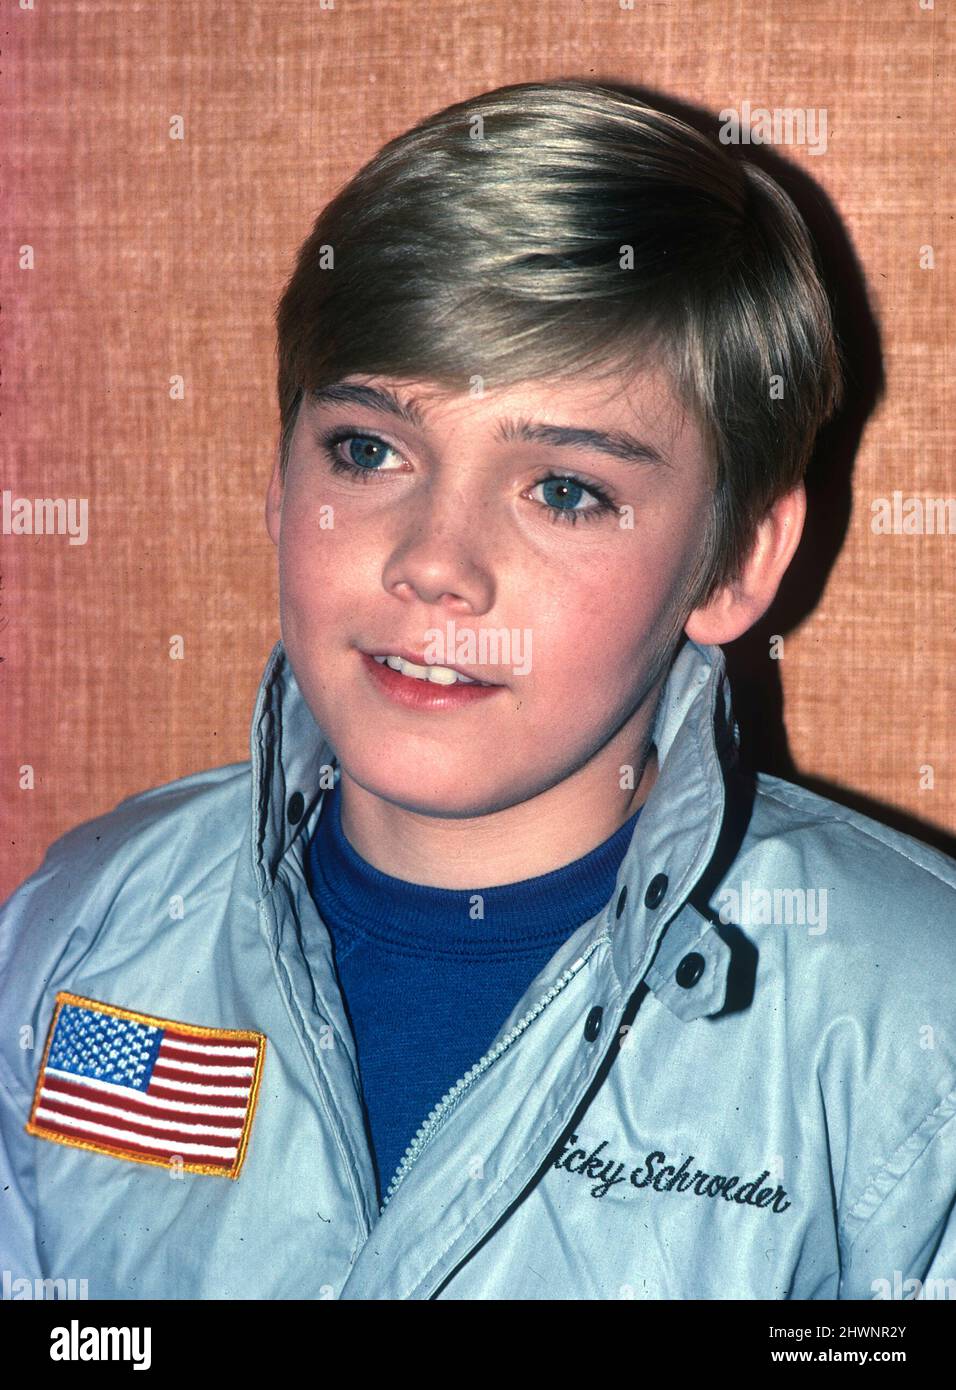 Ricky Schroder attends the Taping of the Television Special 'The Stars Salute the U.S. Olympic Team' to Help Raise Funds for the U.S. Olympic Committee and the U.S. Olympic Team on January 29, 1984 at Pasadena Civic Auditorium in Pasadena, California.  Credit: Ron Wolfson / Rock Negatives / MediaPunch Stock Photo